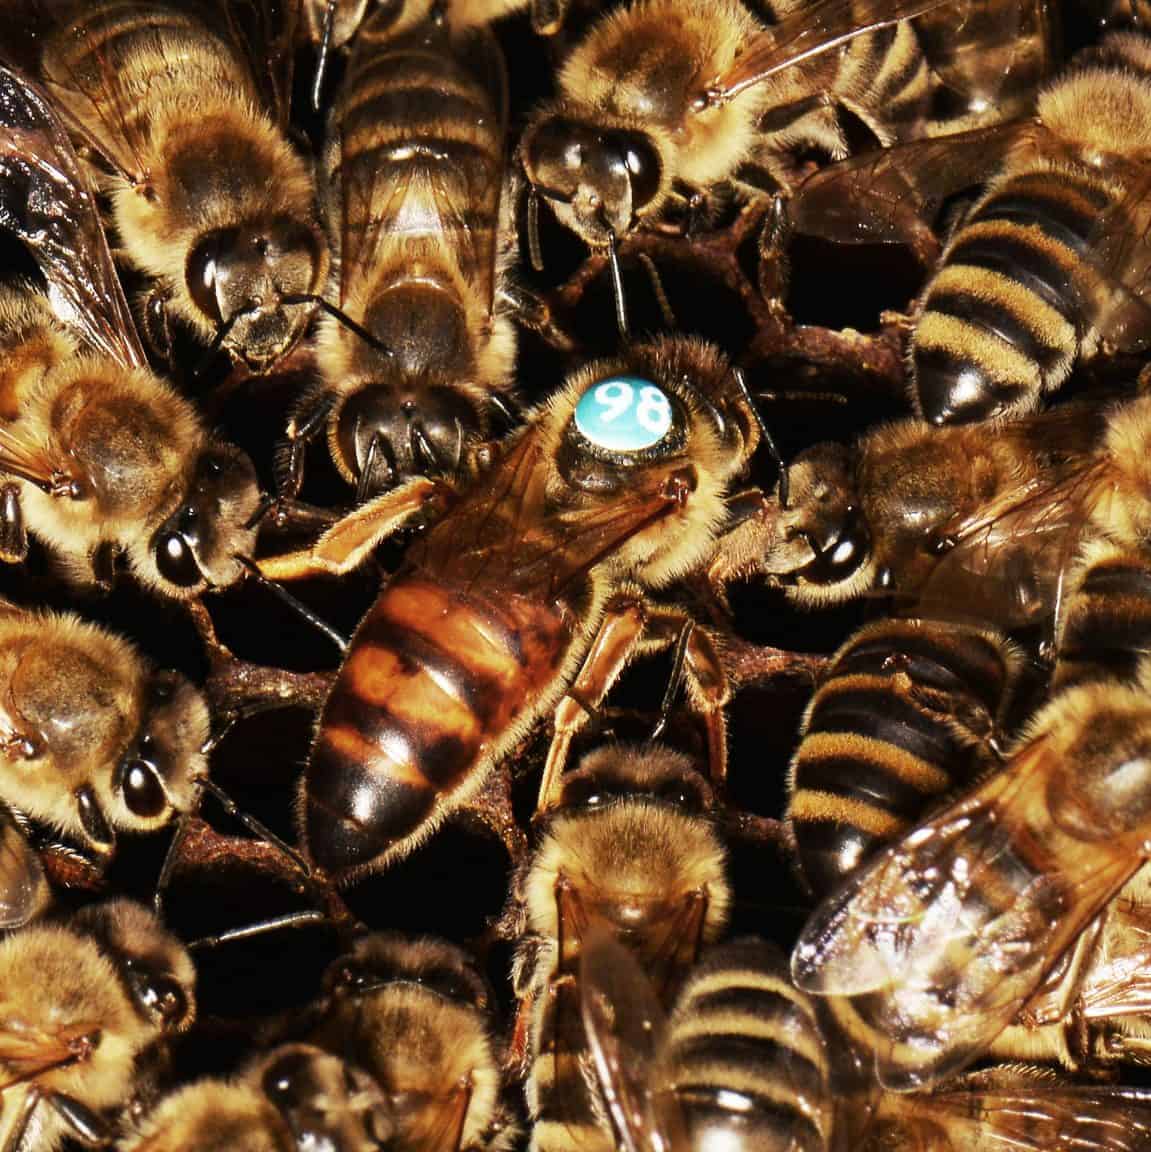 The Queen Bee: her birth, life and death